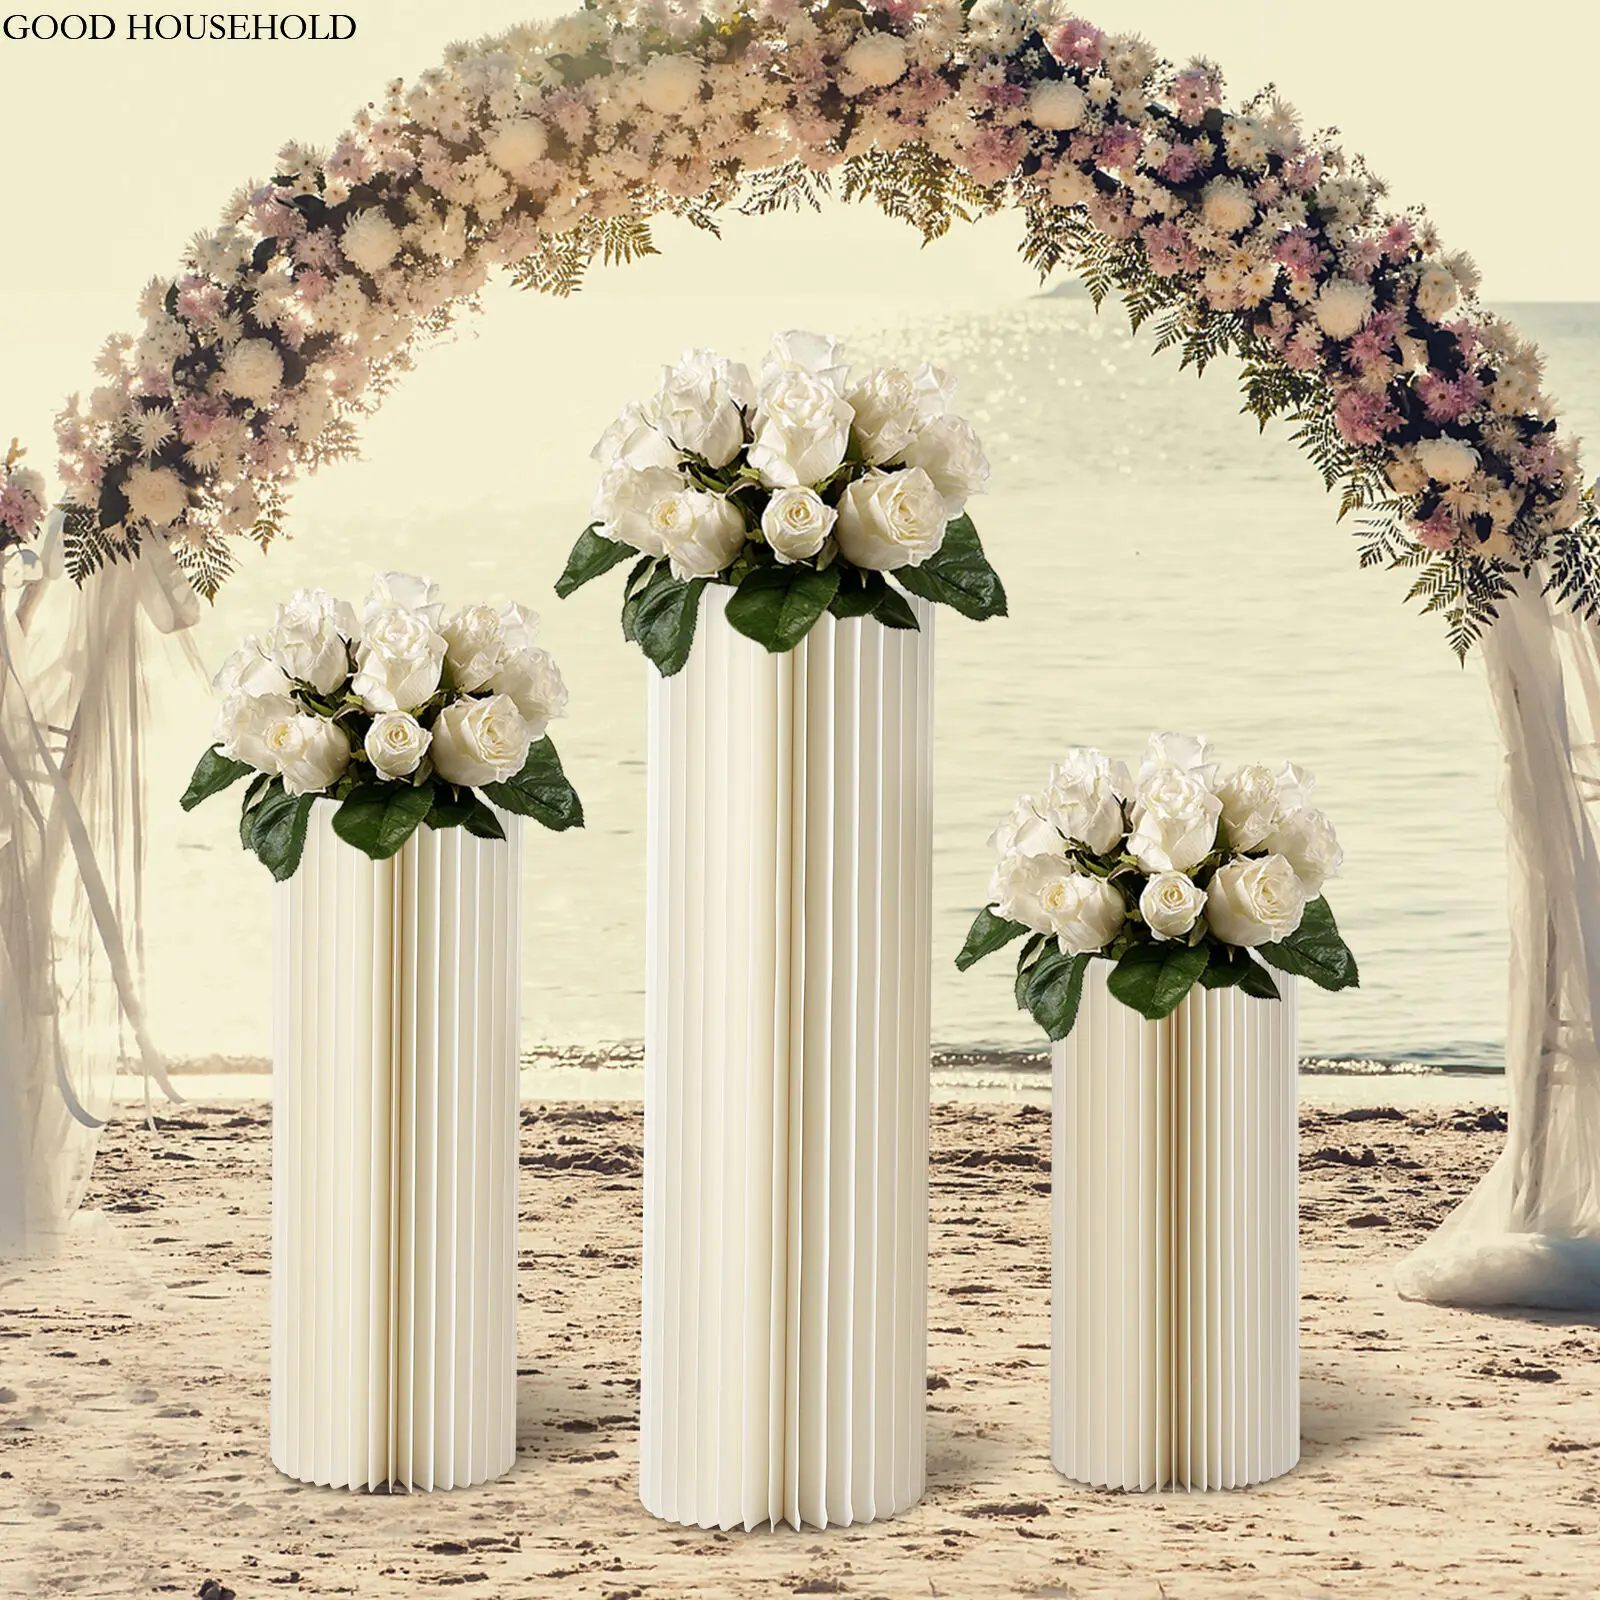 

Wedding Centerpieces: 3 Pcs 60cm+80cm+100cm Tall Flower Stand Centerpiece Stands Display Rack for Weddings Party Decoration